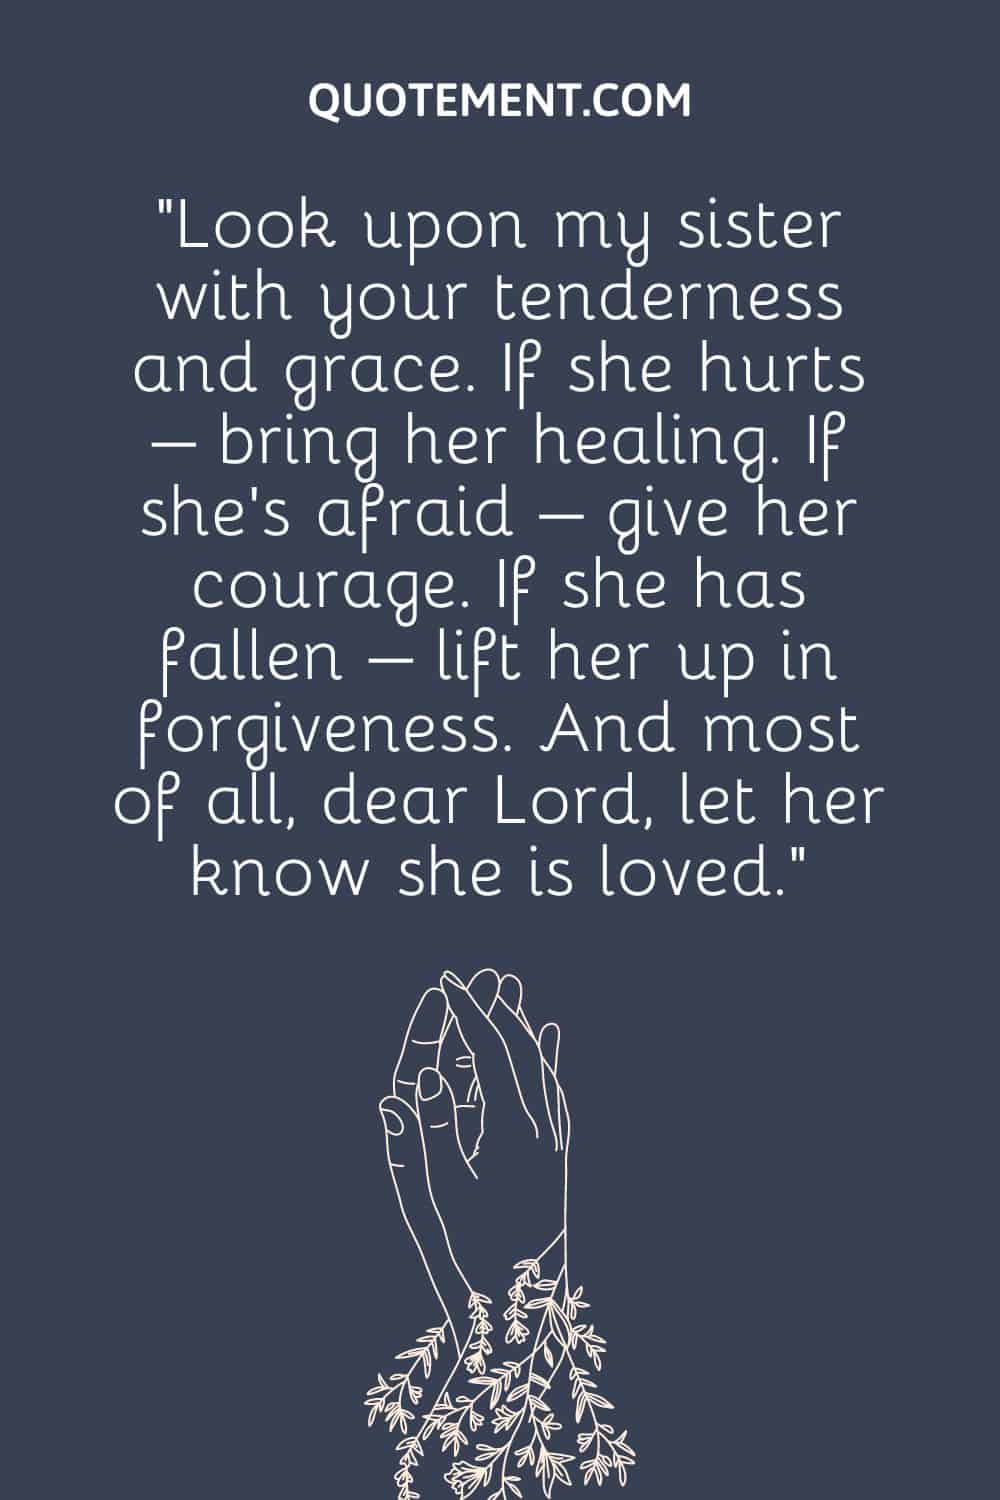 “Look upon my sister with your tenderness and grace. If she hurts – bring her healing.